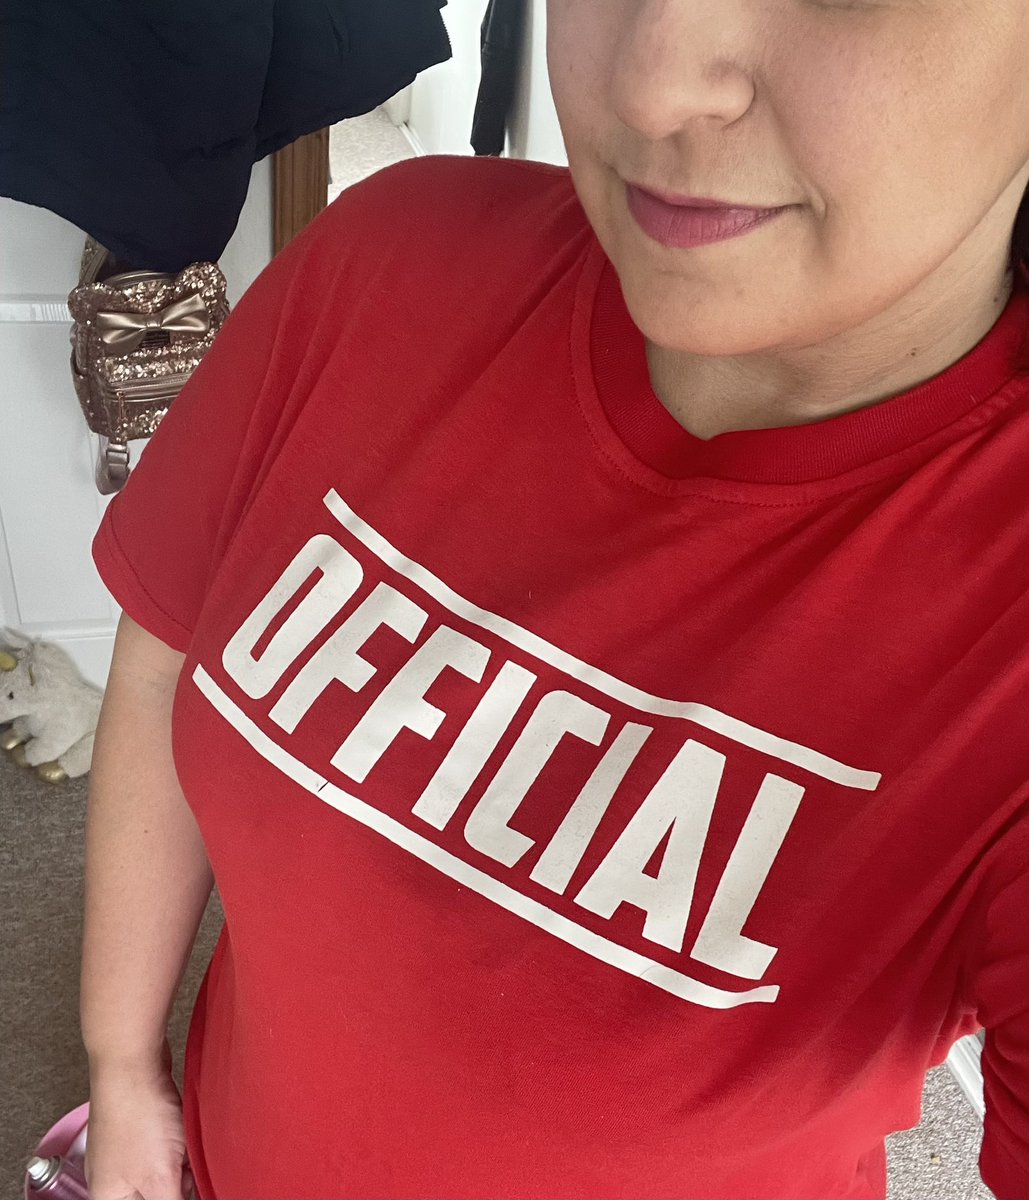 Wearing my new @UK_OFFICIAL_ T-shirt today! ❤️❤️❤️ 
#MakeitOfficial #SaturdayVibes